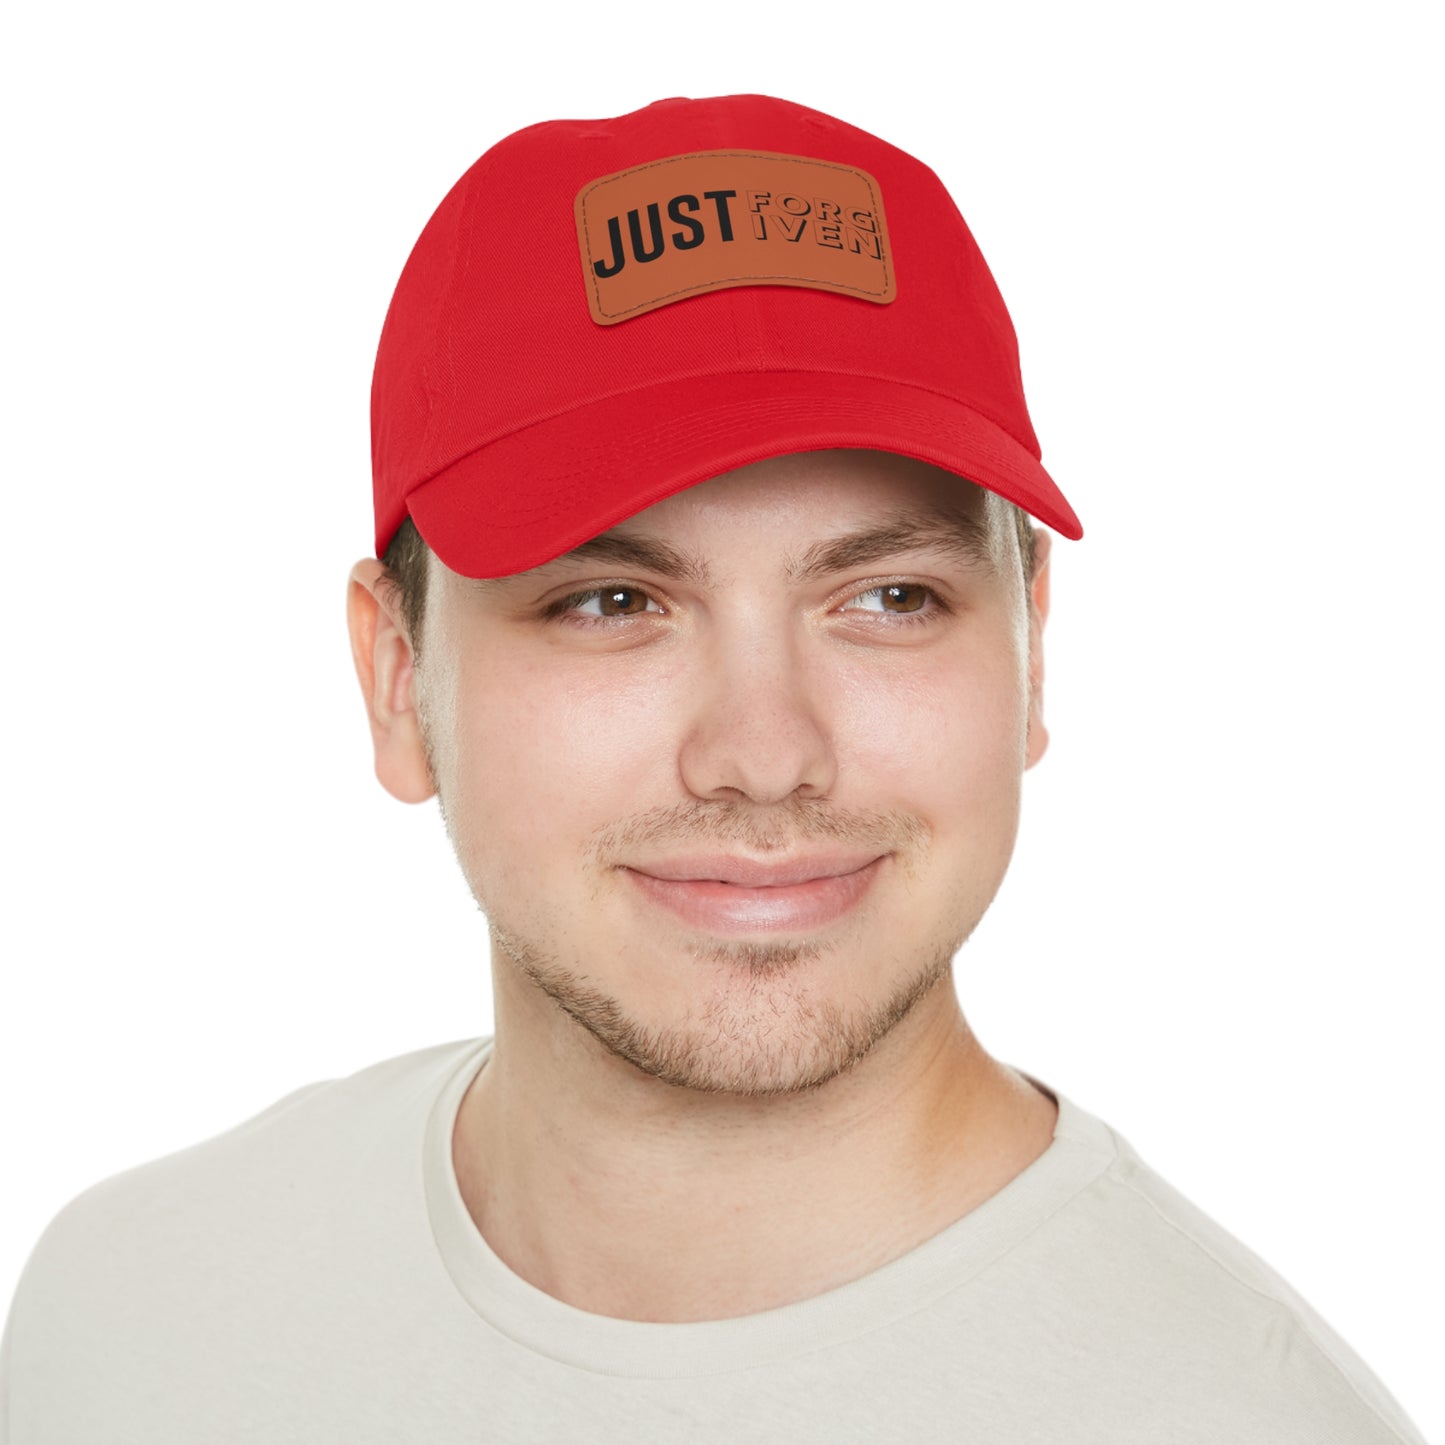 JUST FORGIVEN - LEATHER PATCH CAP